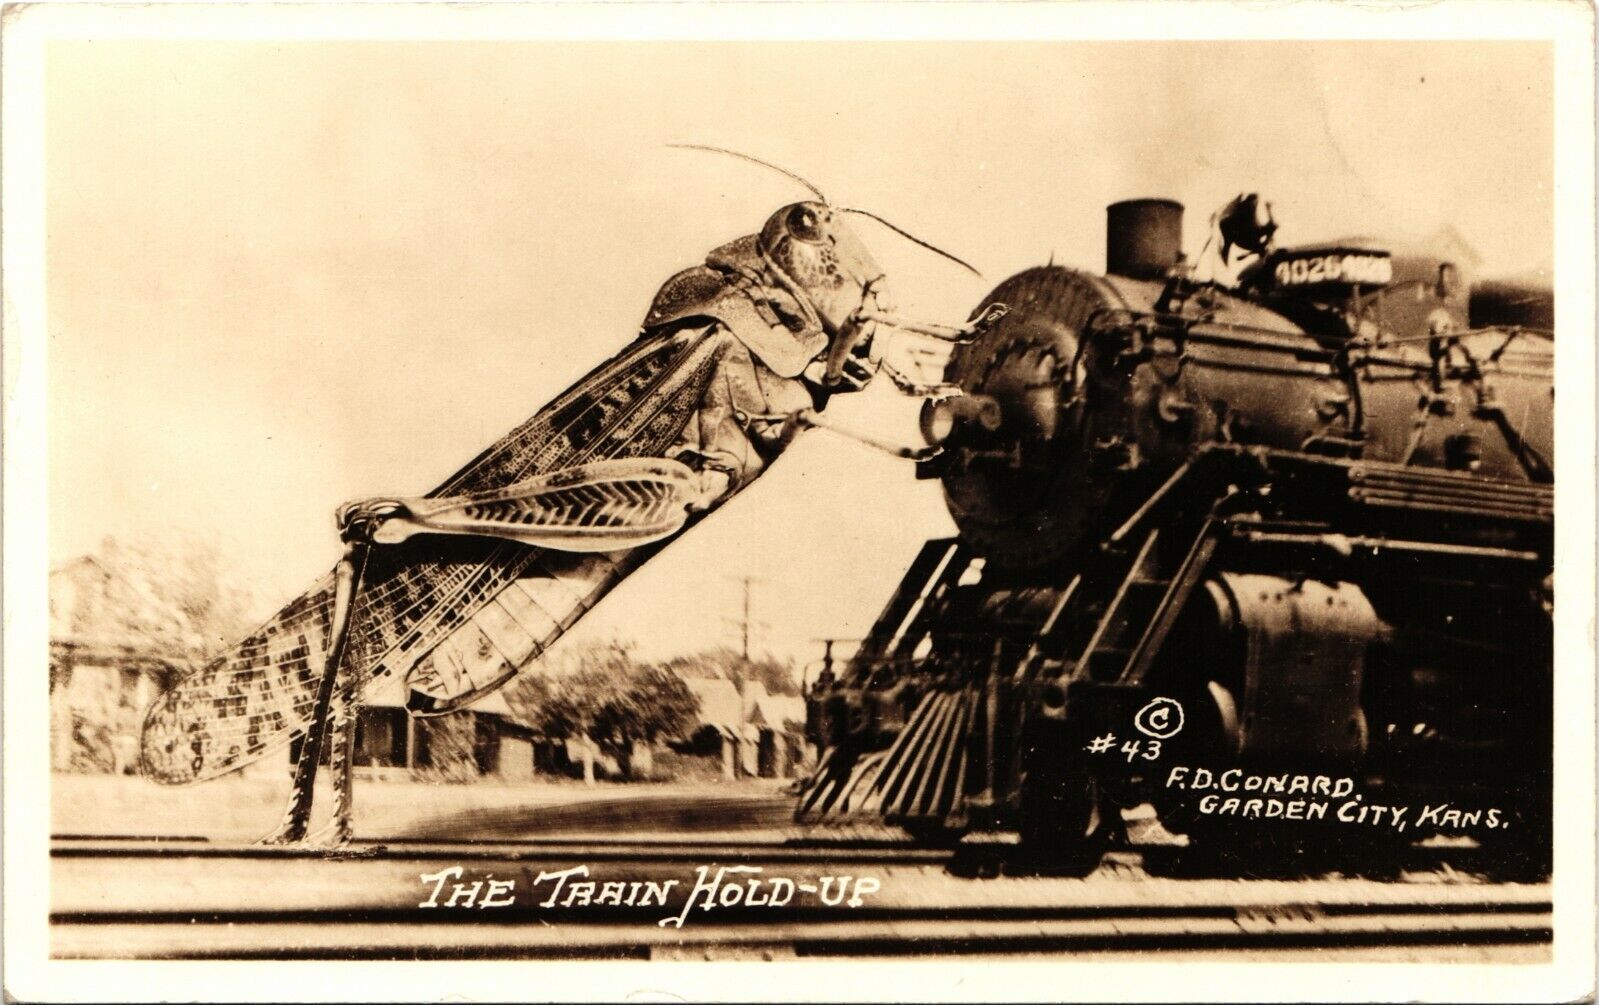 GRASSHOPPER ROBS TRAIN real photo postcard rppc THE HOLD UP EXAGGERATION